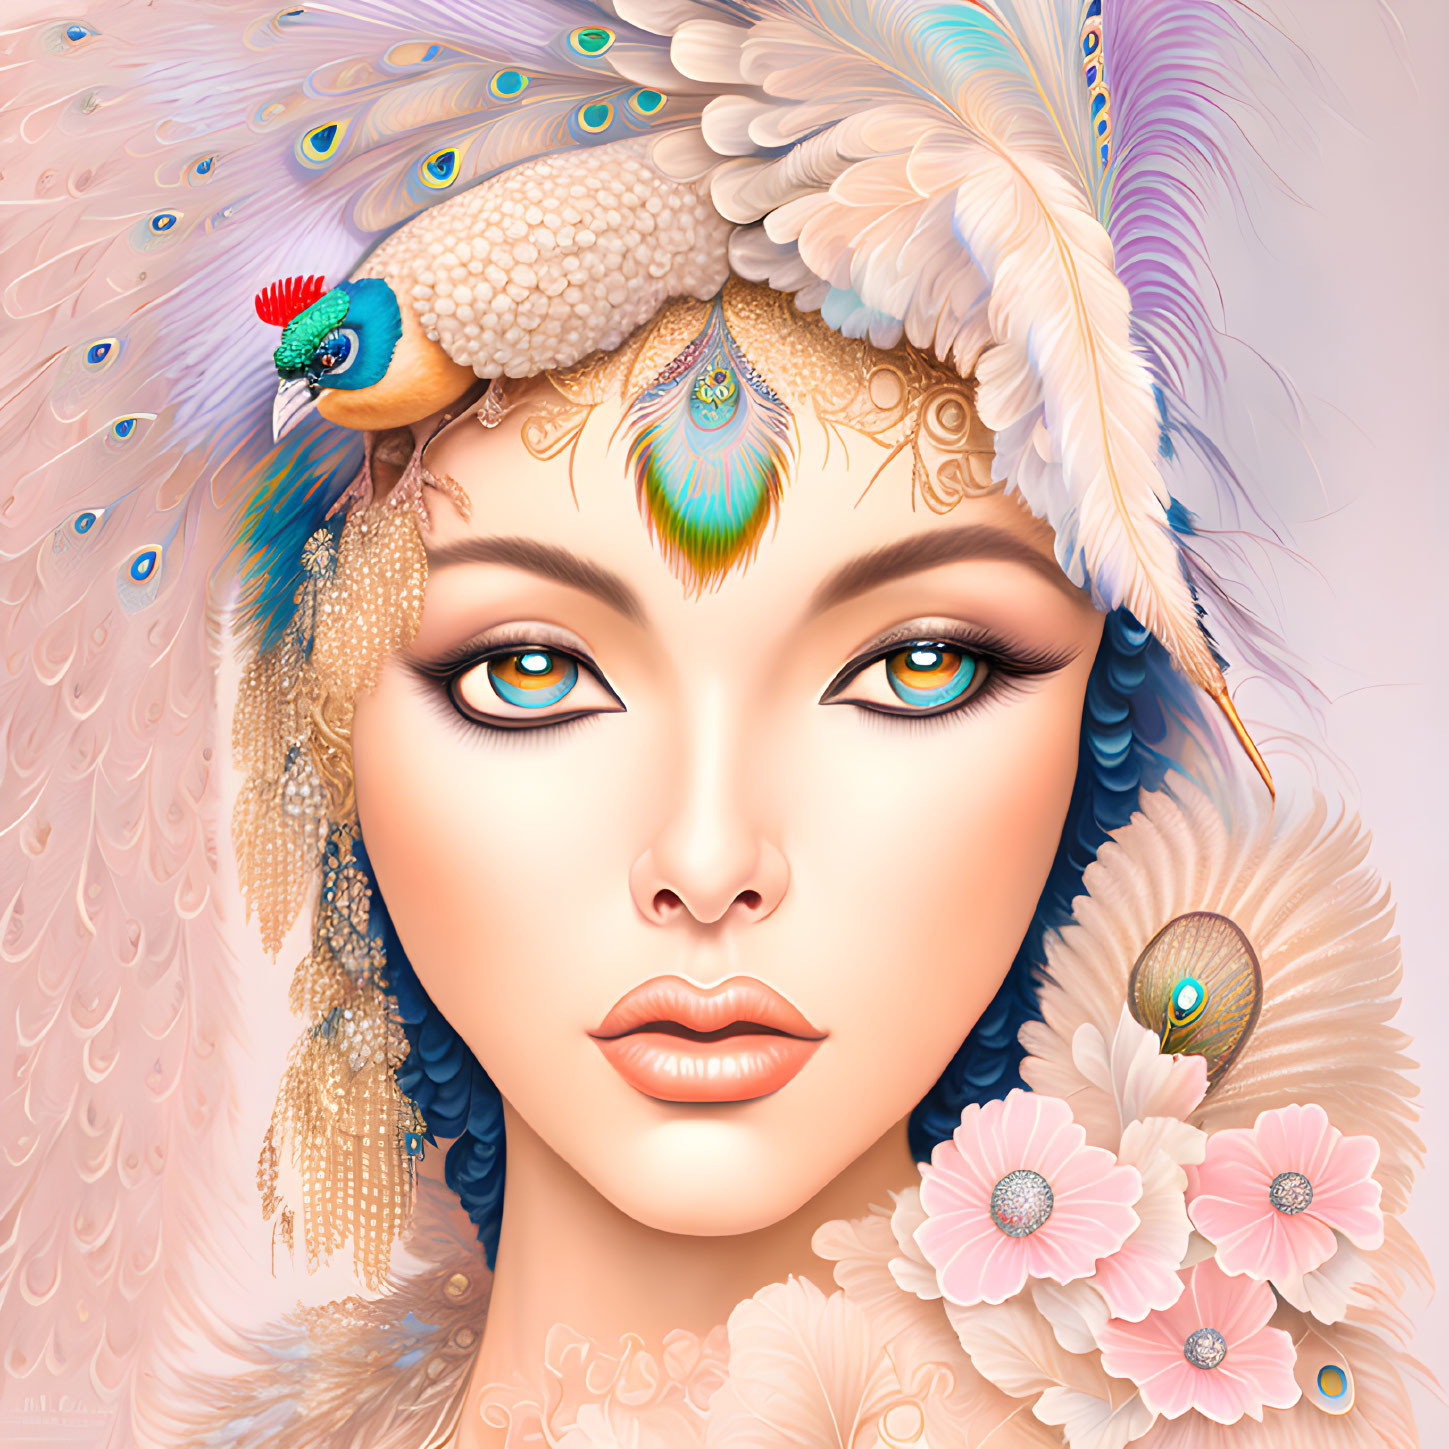 Stylized illustration of woman with large blue eyes and peacock feather headwear